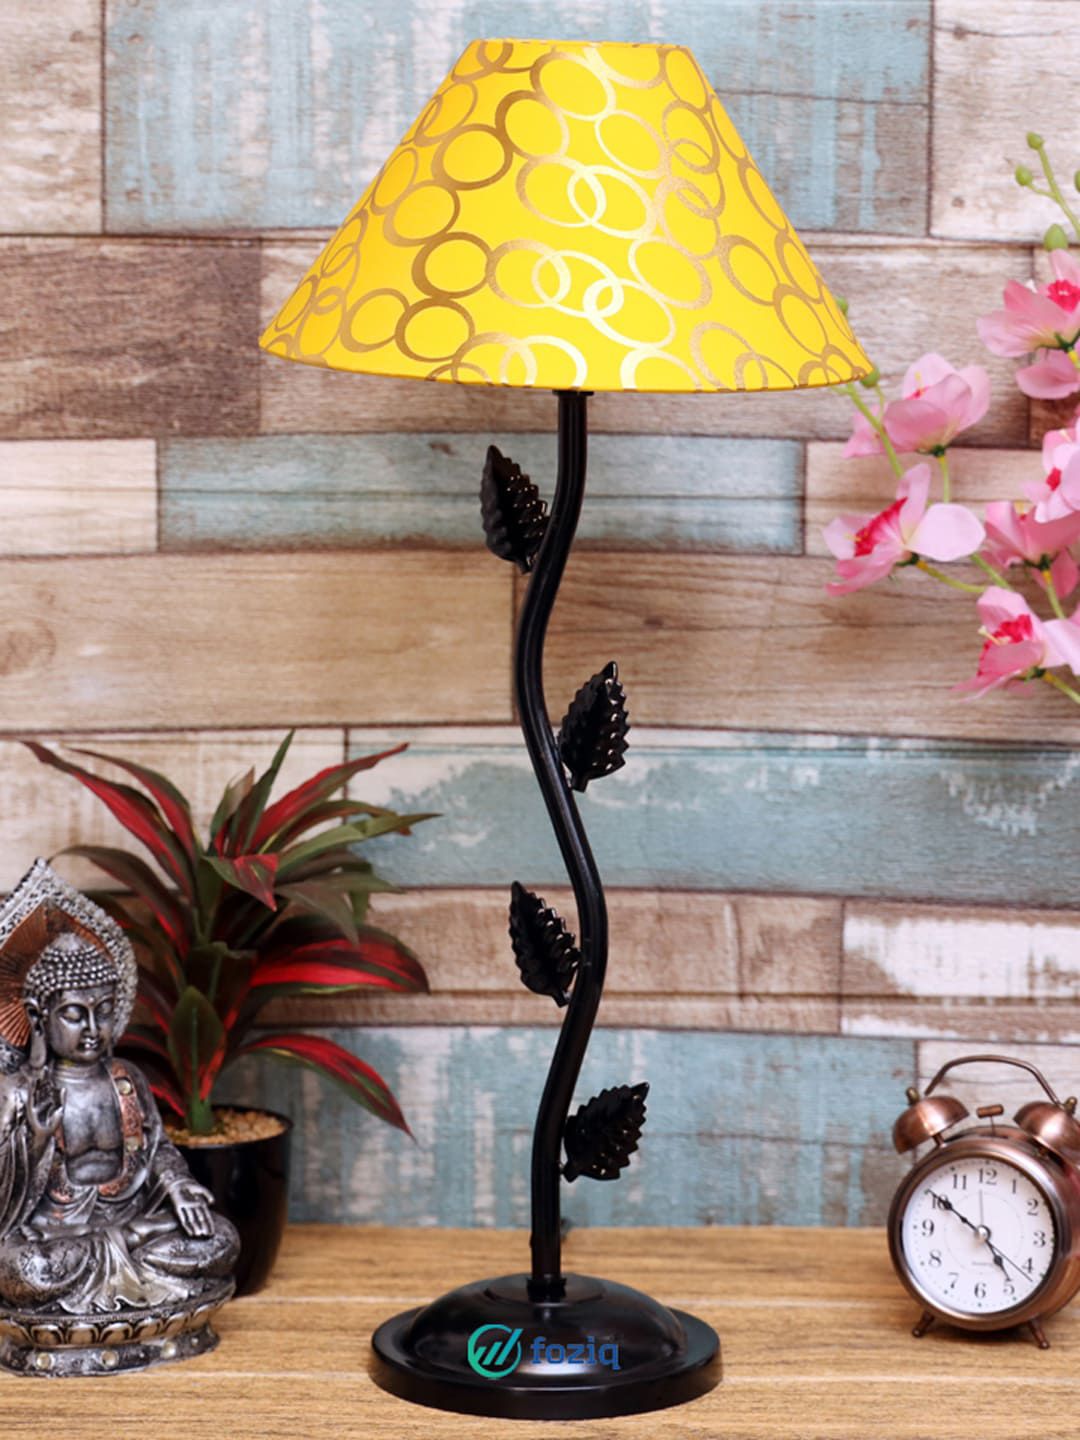 foziq Adults Unisex Black & Yellow Printed Table Lamp Price in India